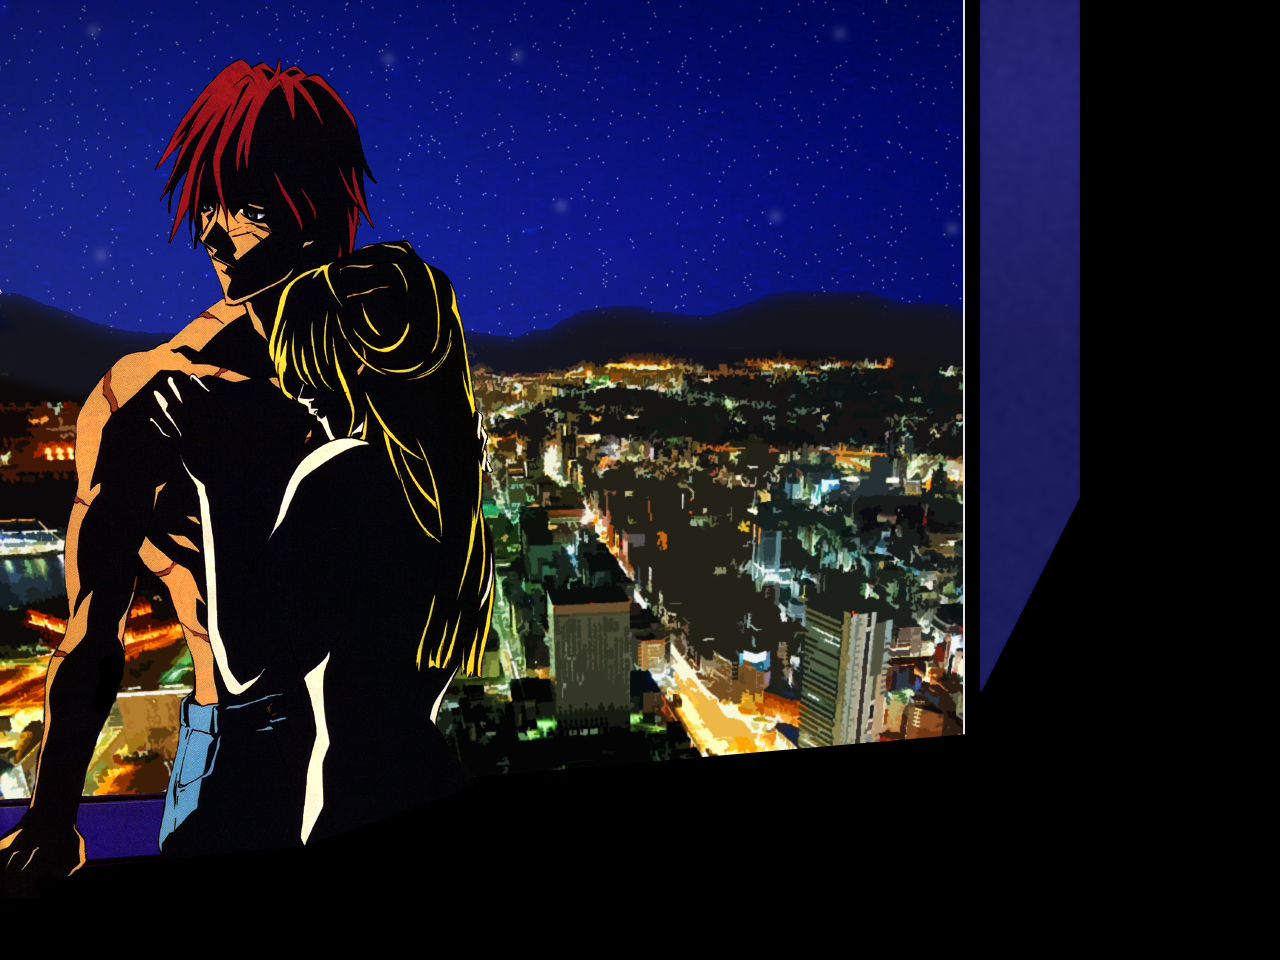 Outlaw Star #7